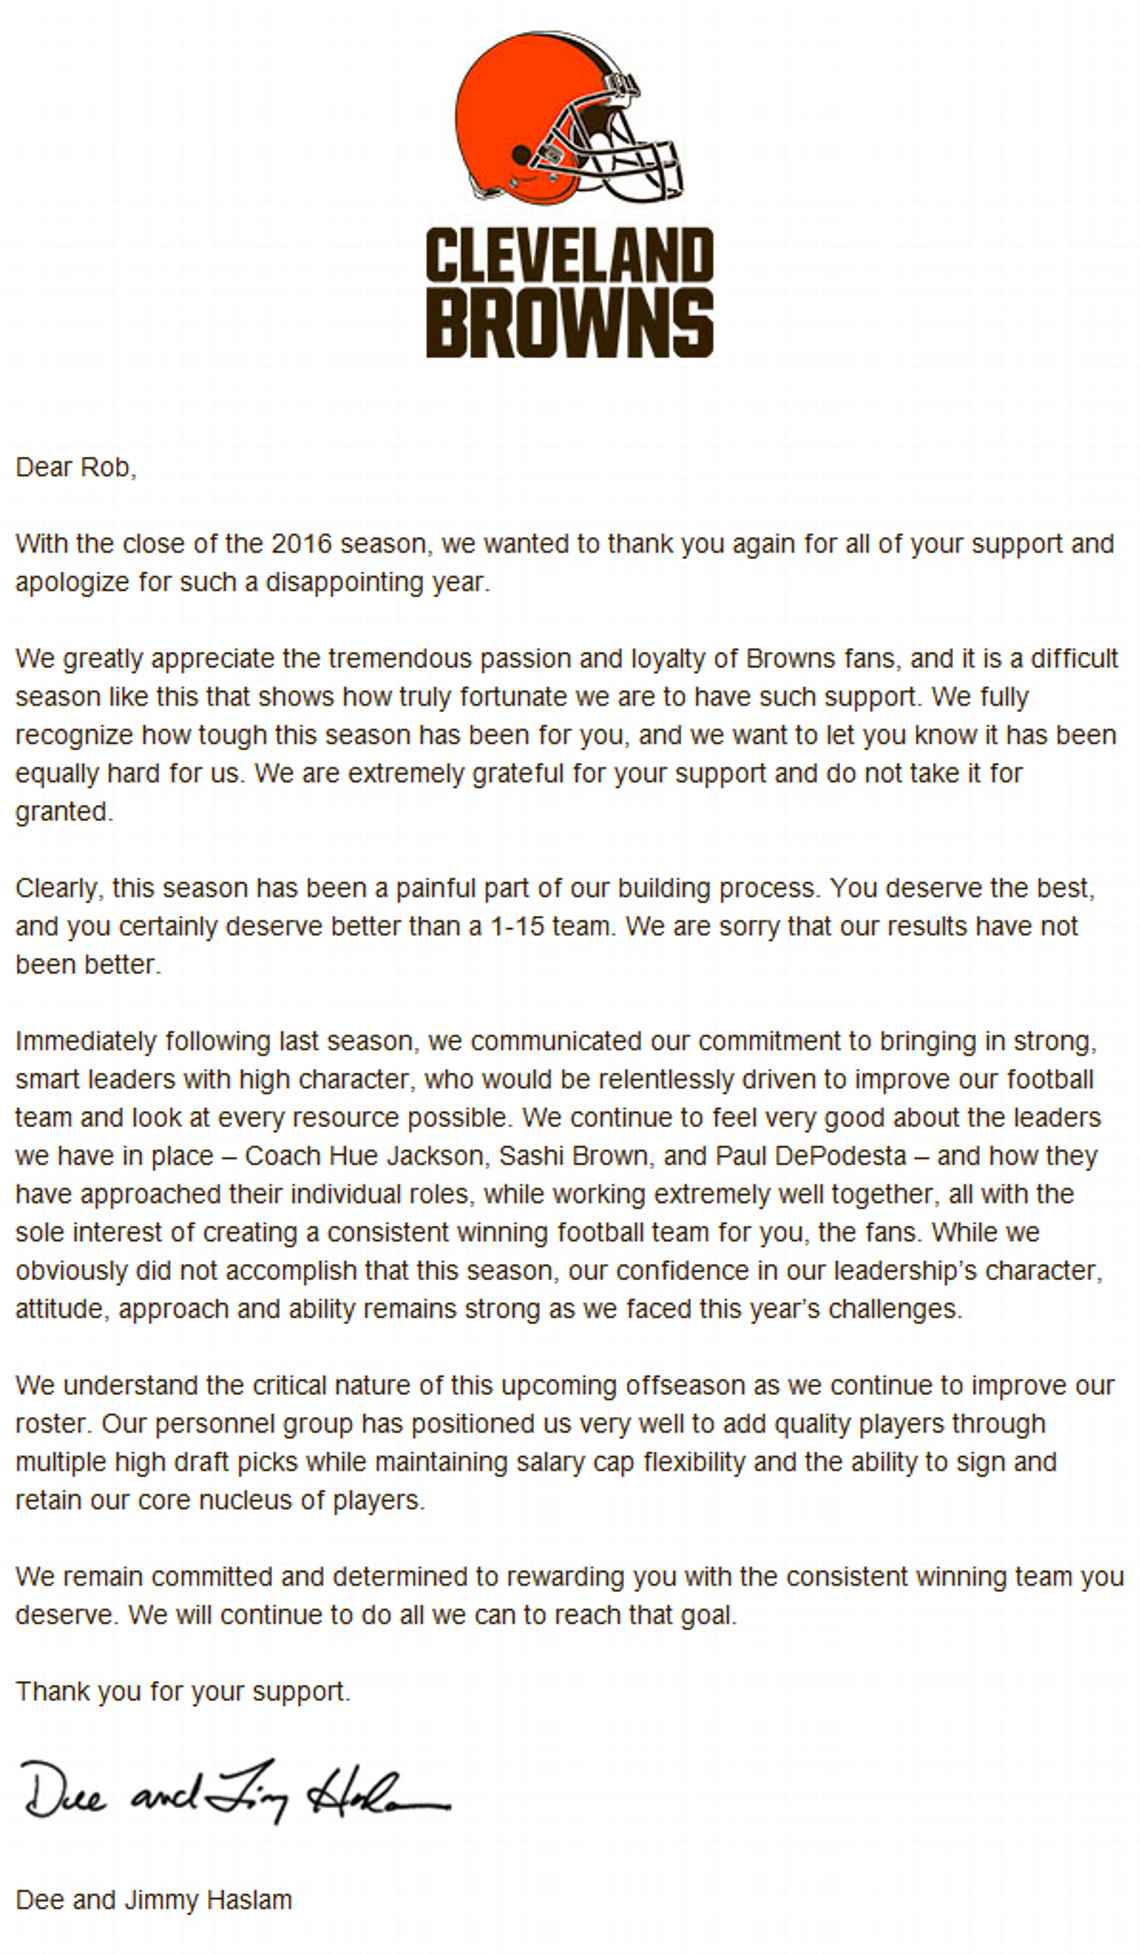 Cleveland Browns Send Apology Letter To Fans After Embarrassing 1 15 Season Daily Snark